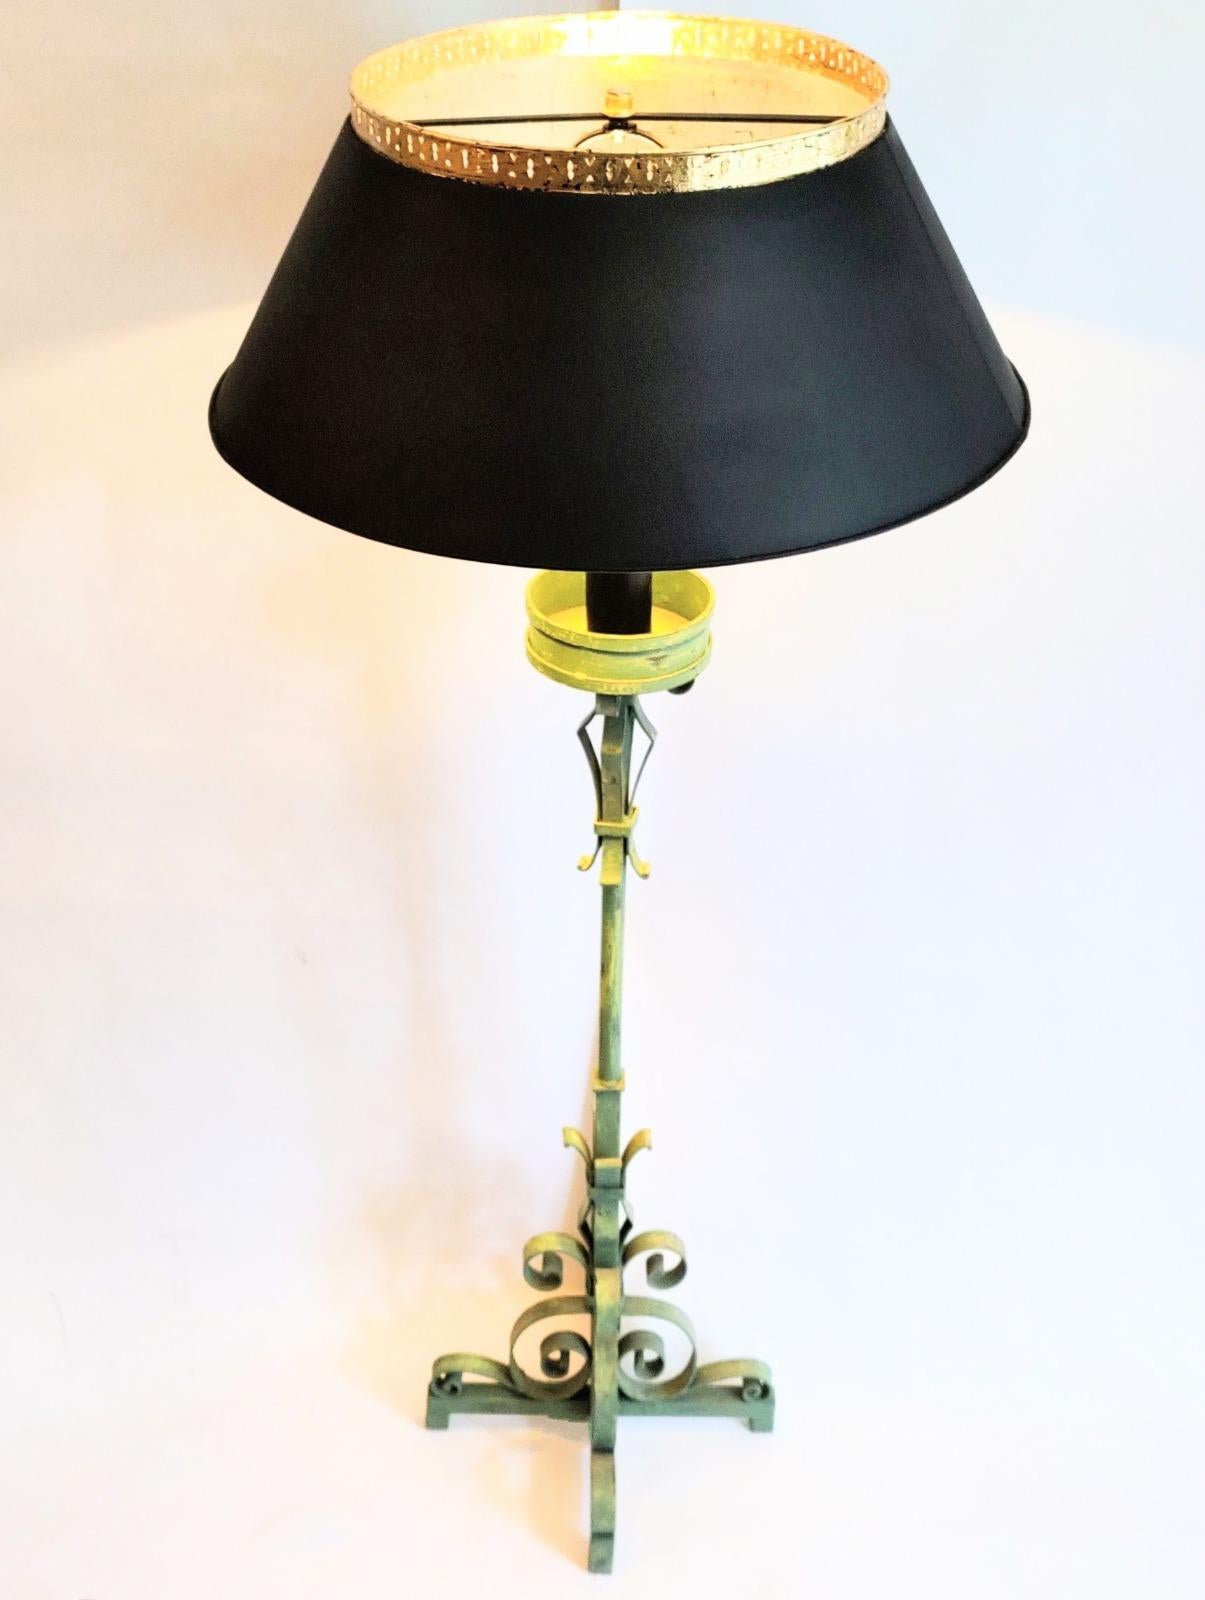 Neoclassical Revival Original and Elegant Wrought Iron Lamp from the 1950s. in Green, Black and Gold. For Sale